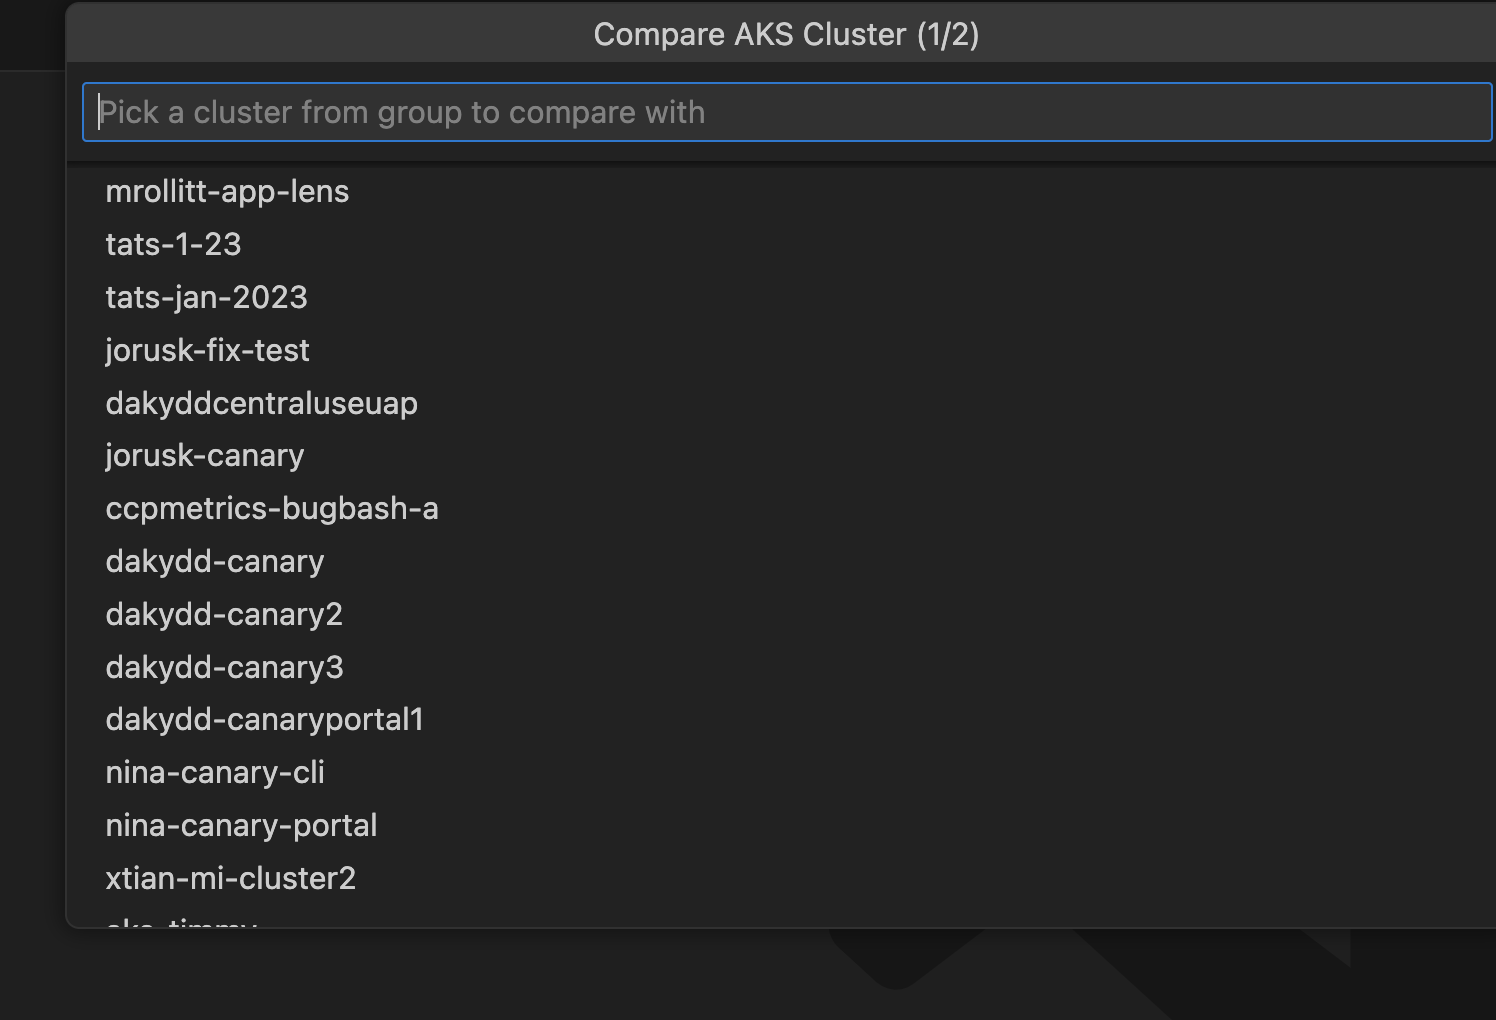 Select AKS Cluster to Compare With